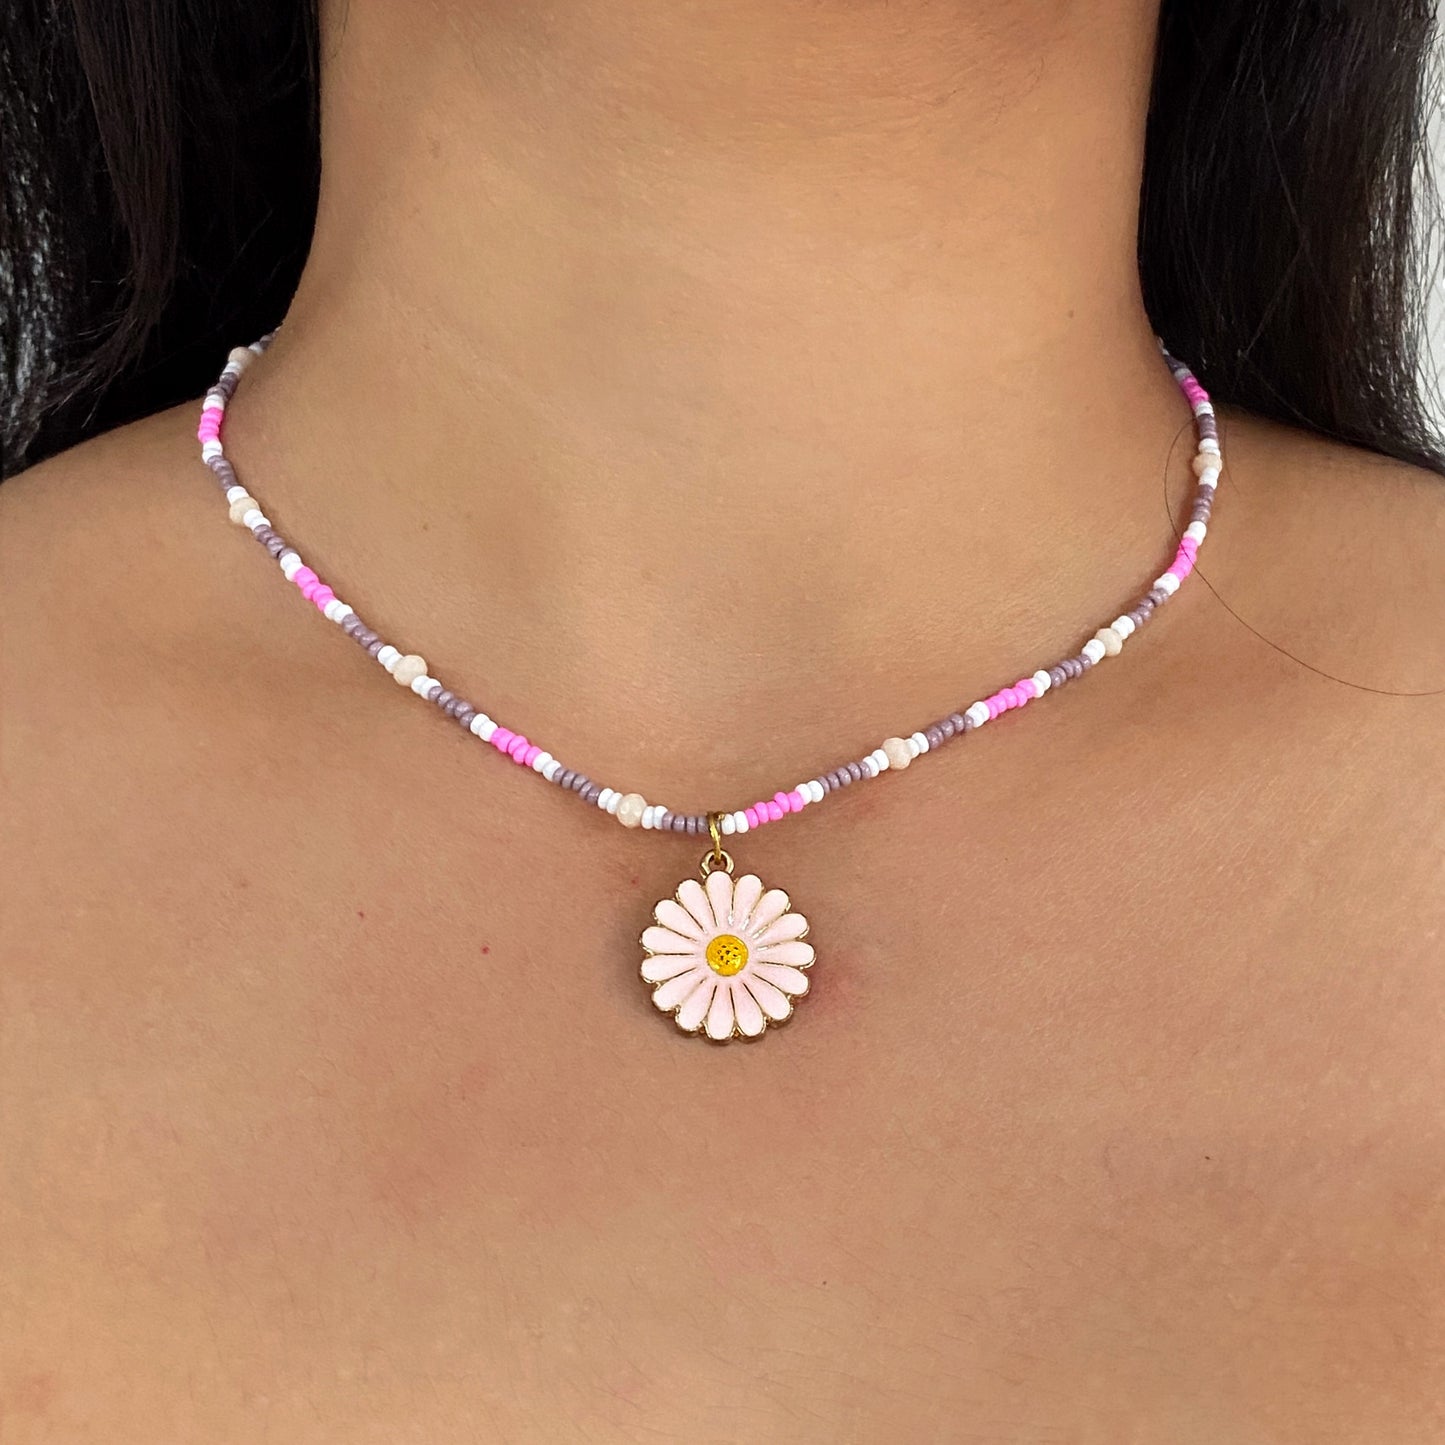 PINK DAISY NECKLACE